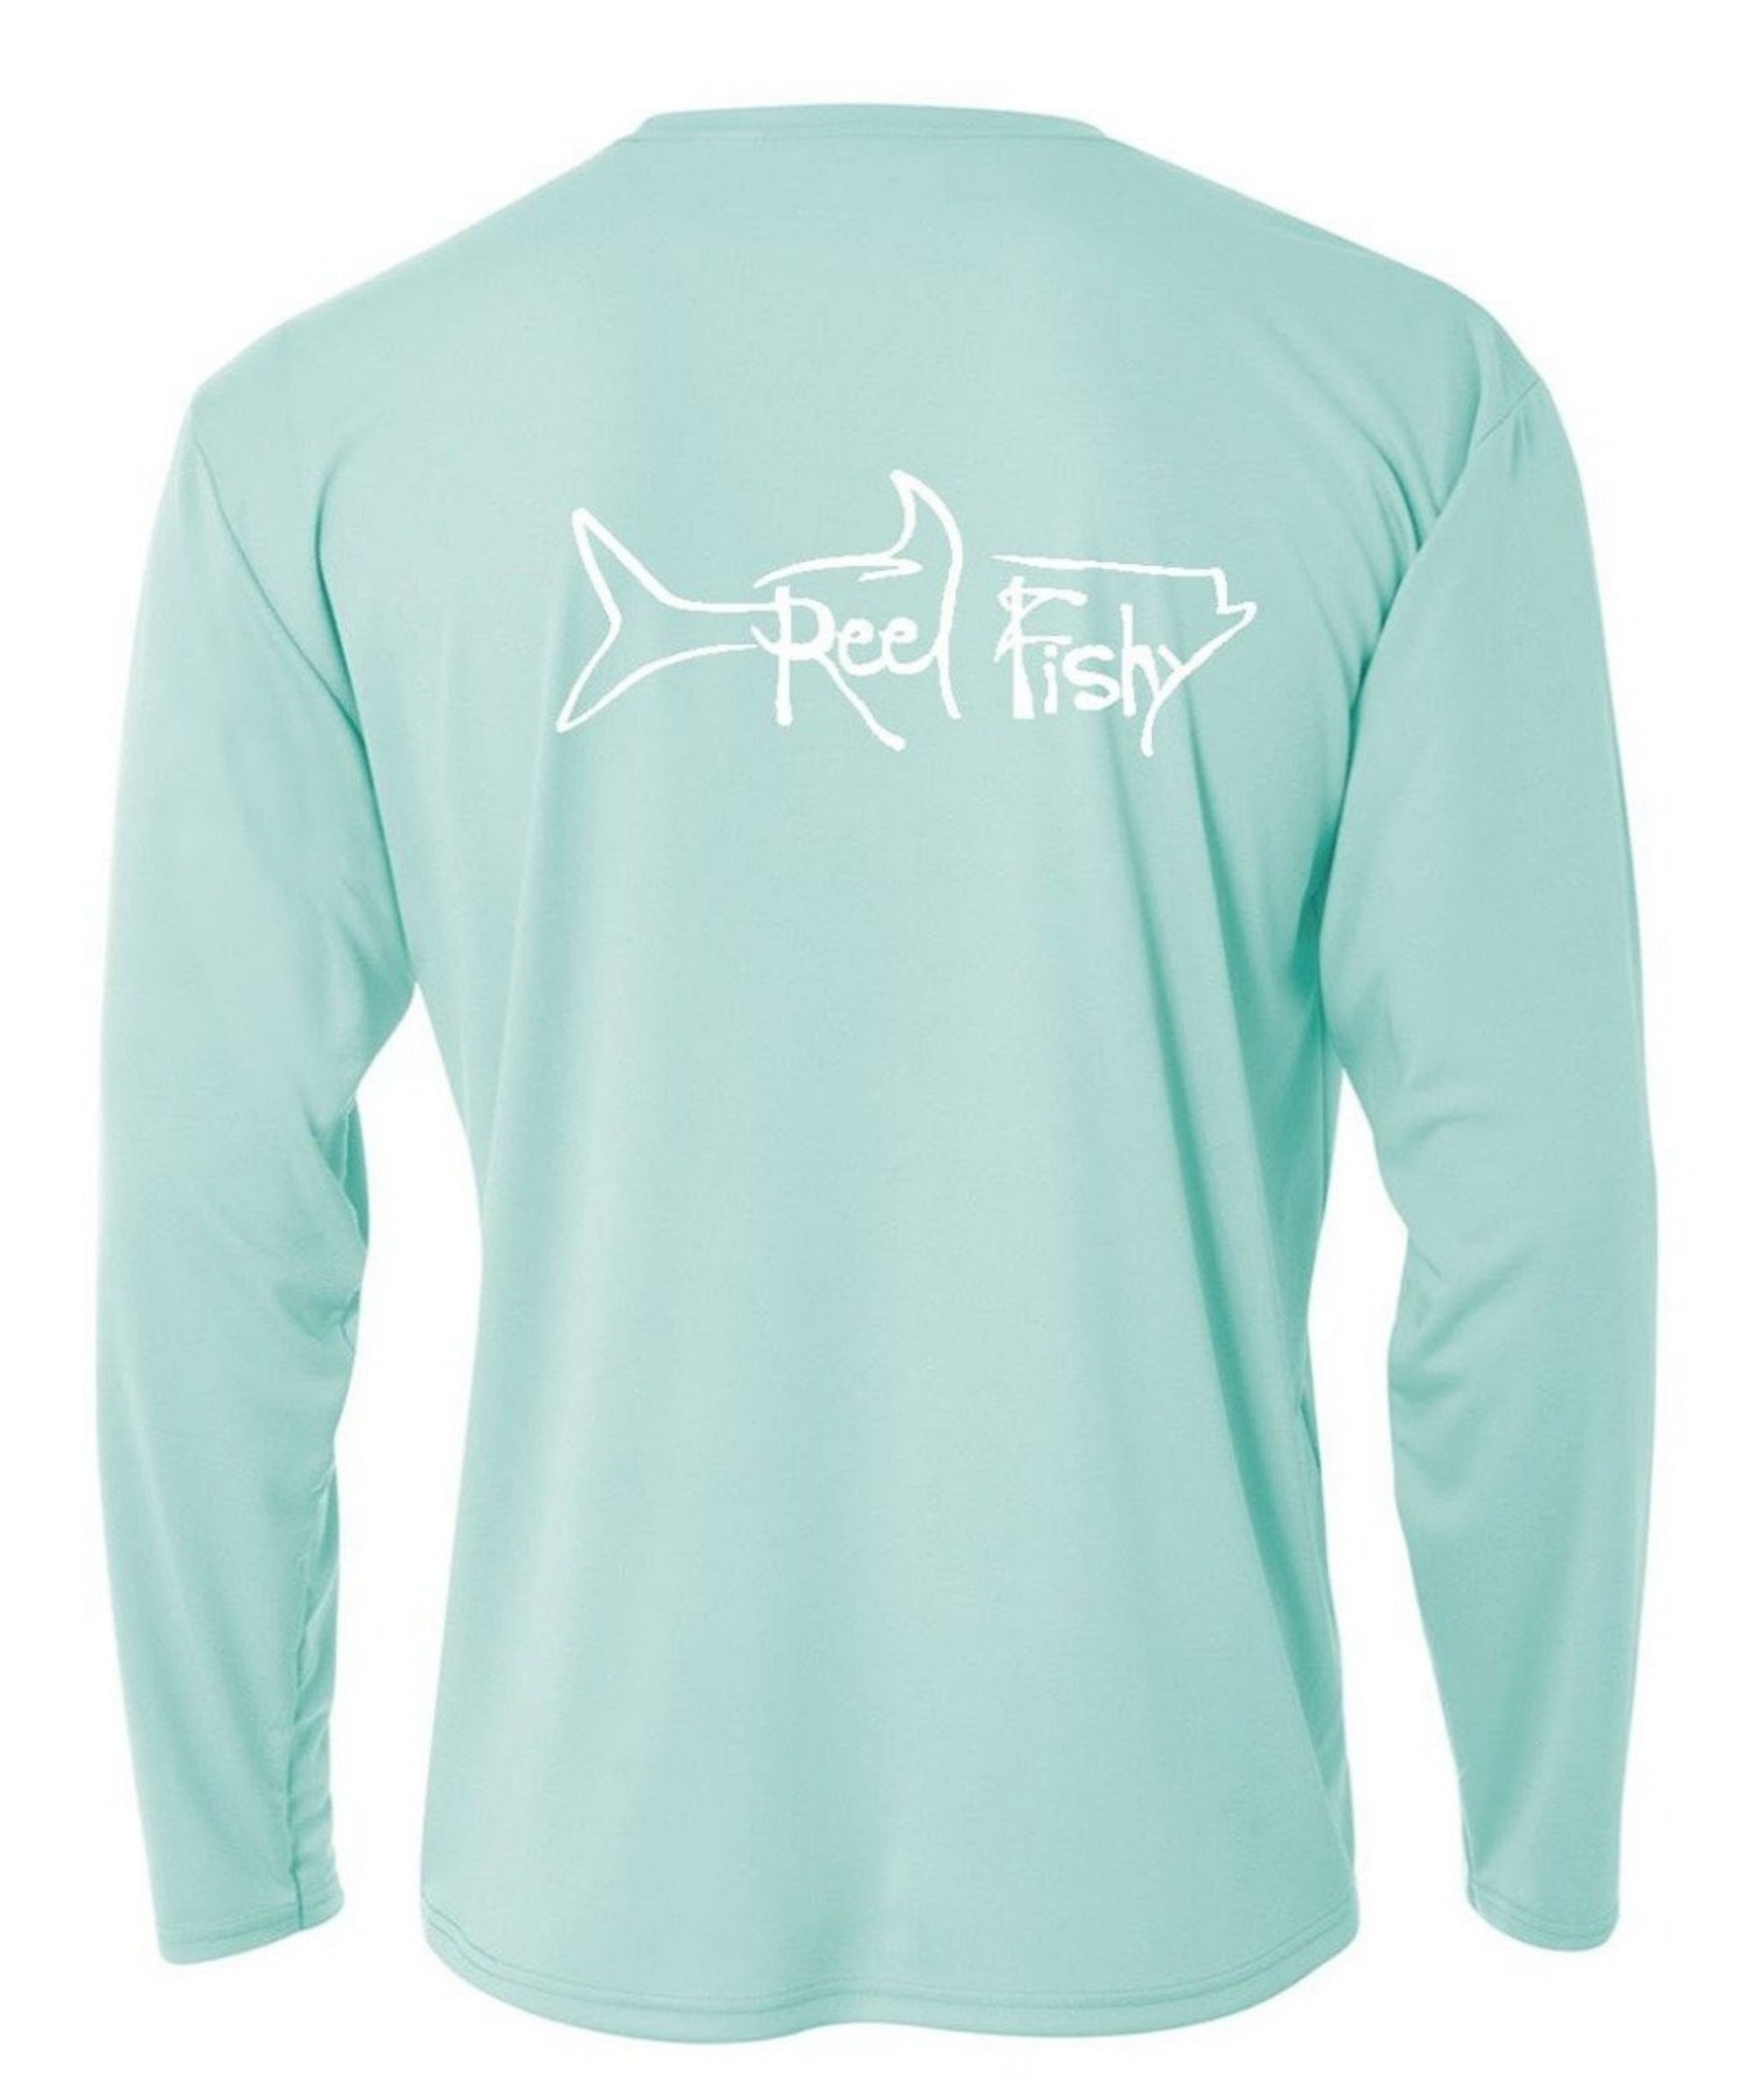 Performance Dry-Fit Tarpon Fishing long sleeve shirts with Sun Protection - Seagrass - Reel Fishy Tarpon logo in White